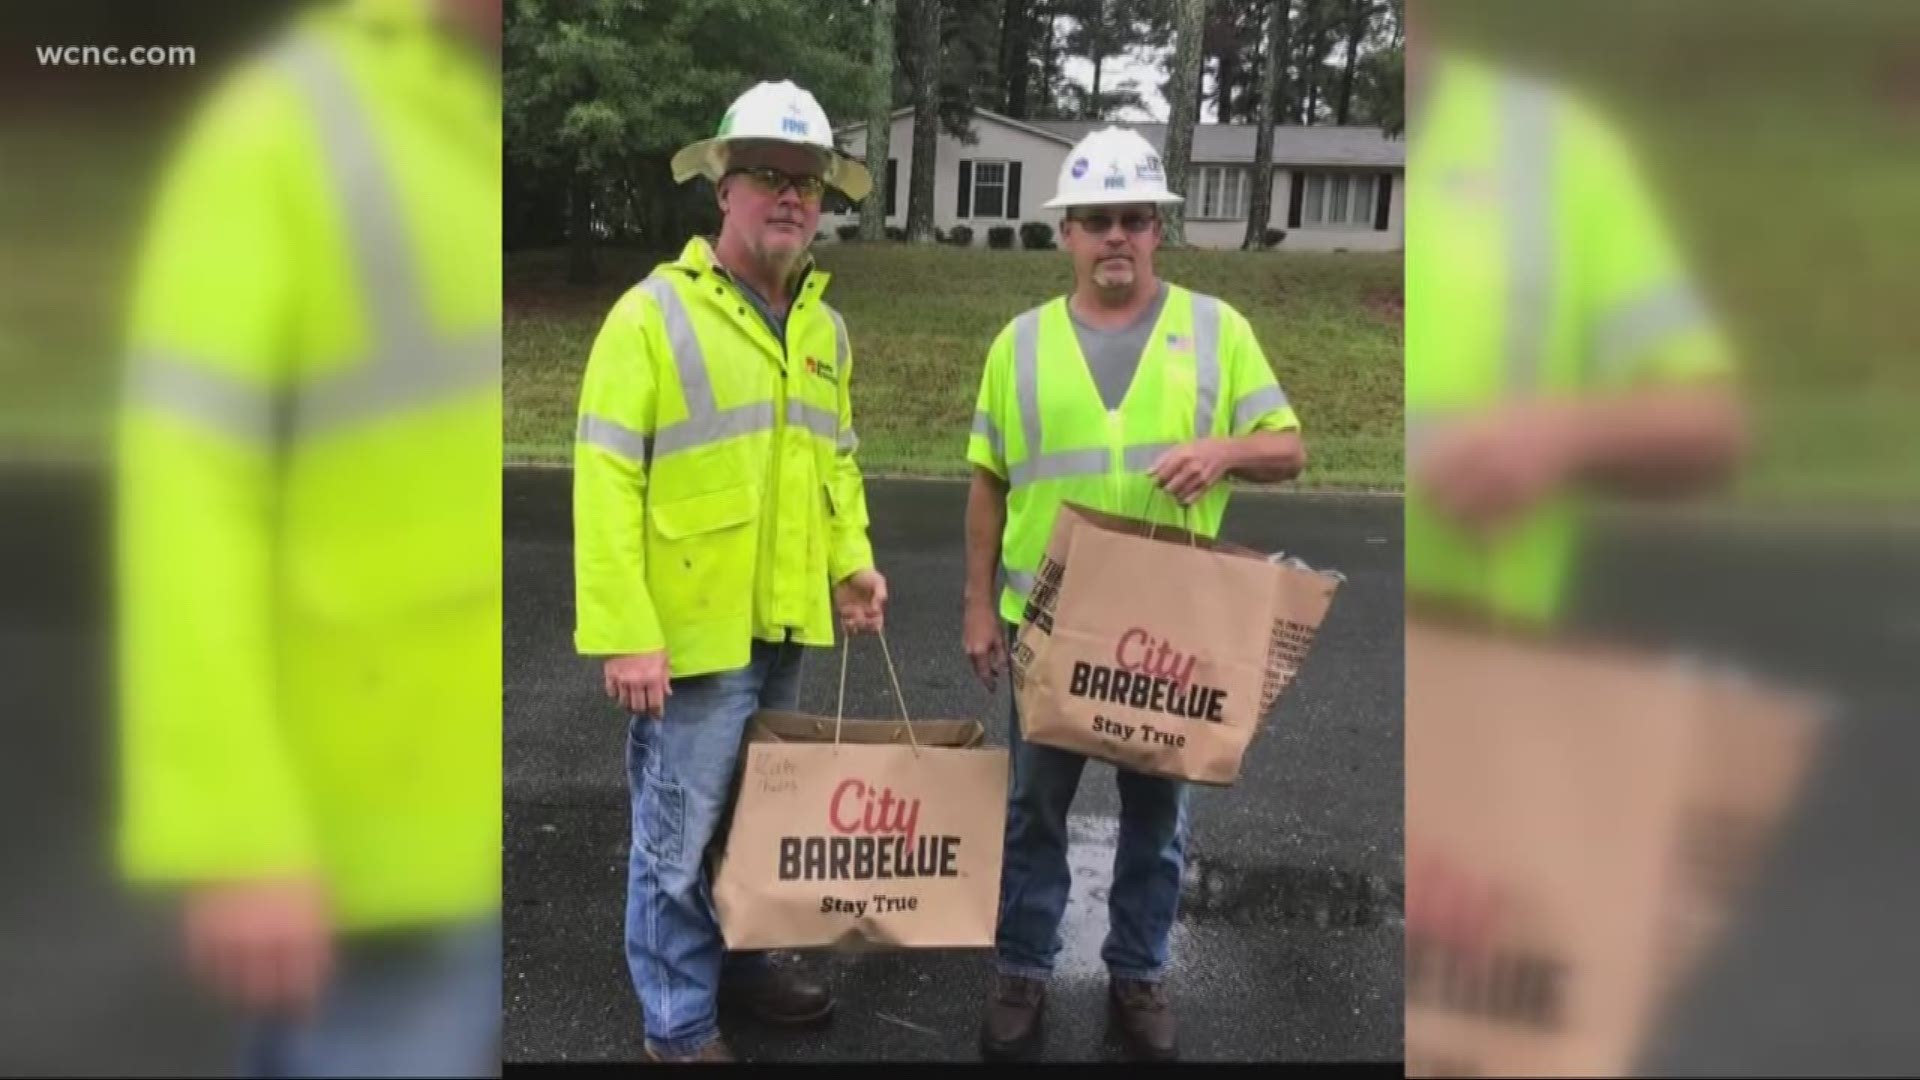 Charlotte residents shared their gratitude with linemen and first responders through good deeds throughout the Charlotte area.